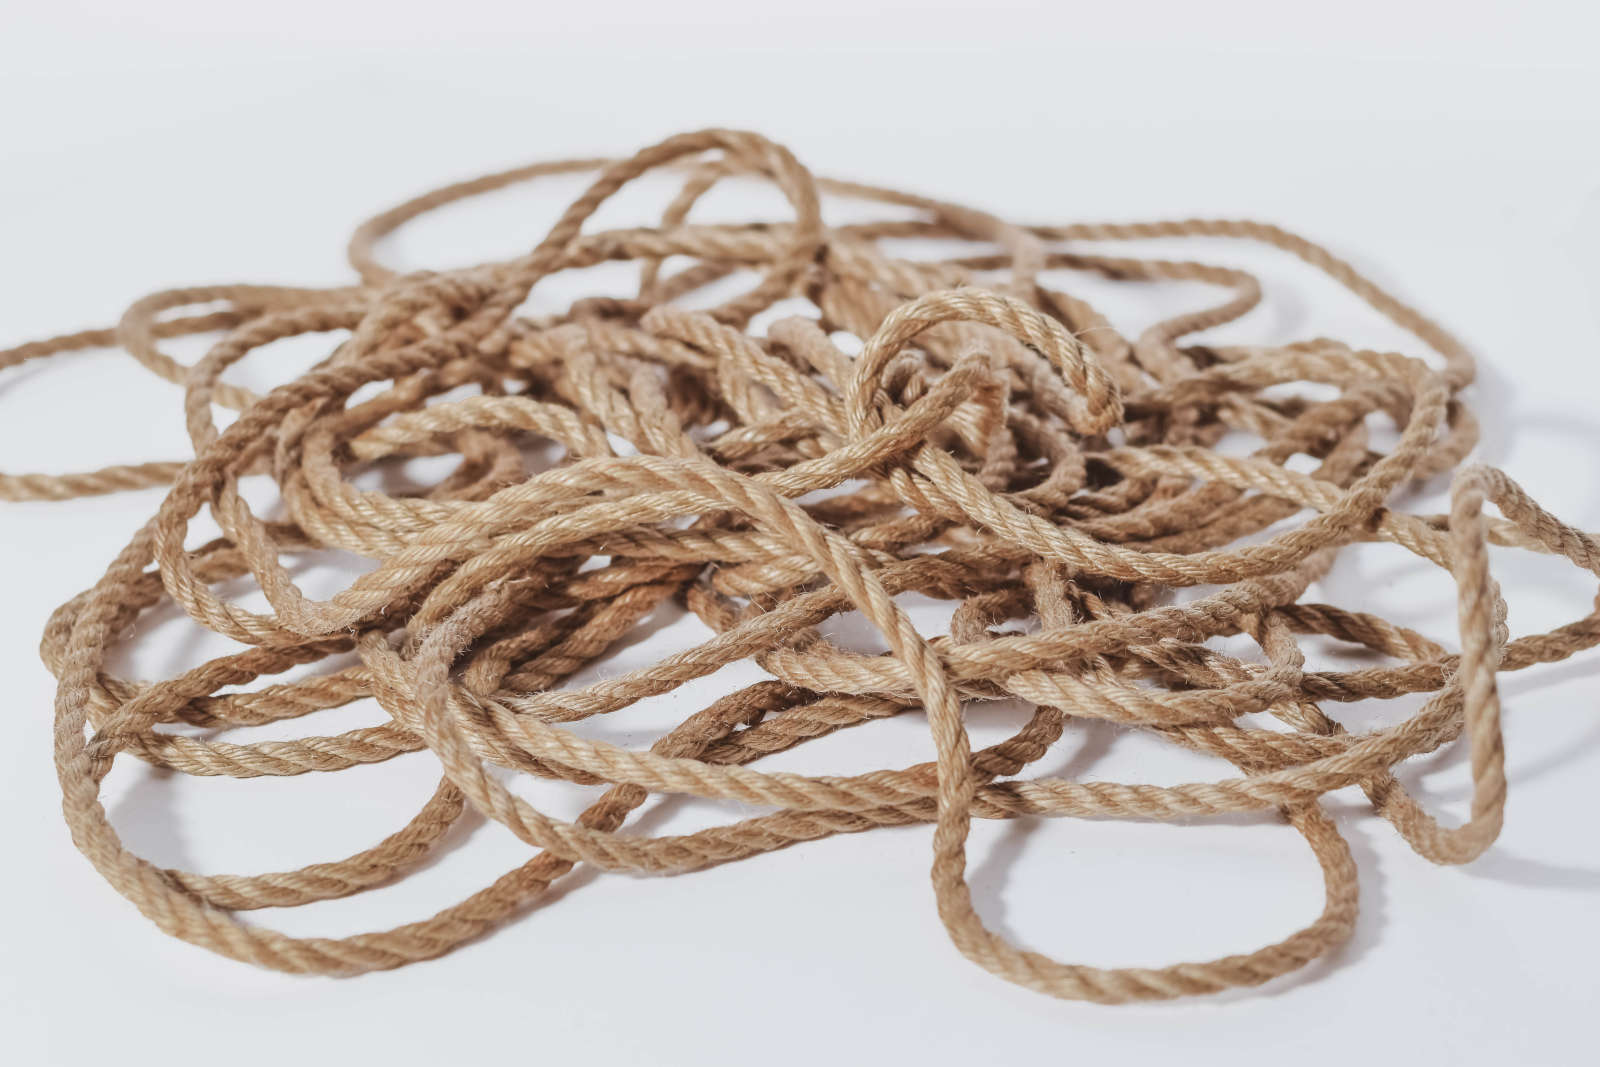 Jute ropes unhanked on a white background